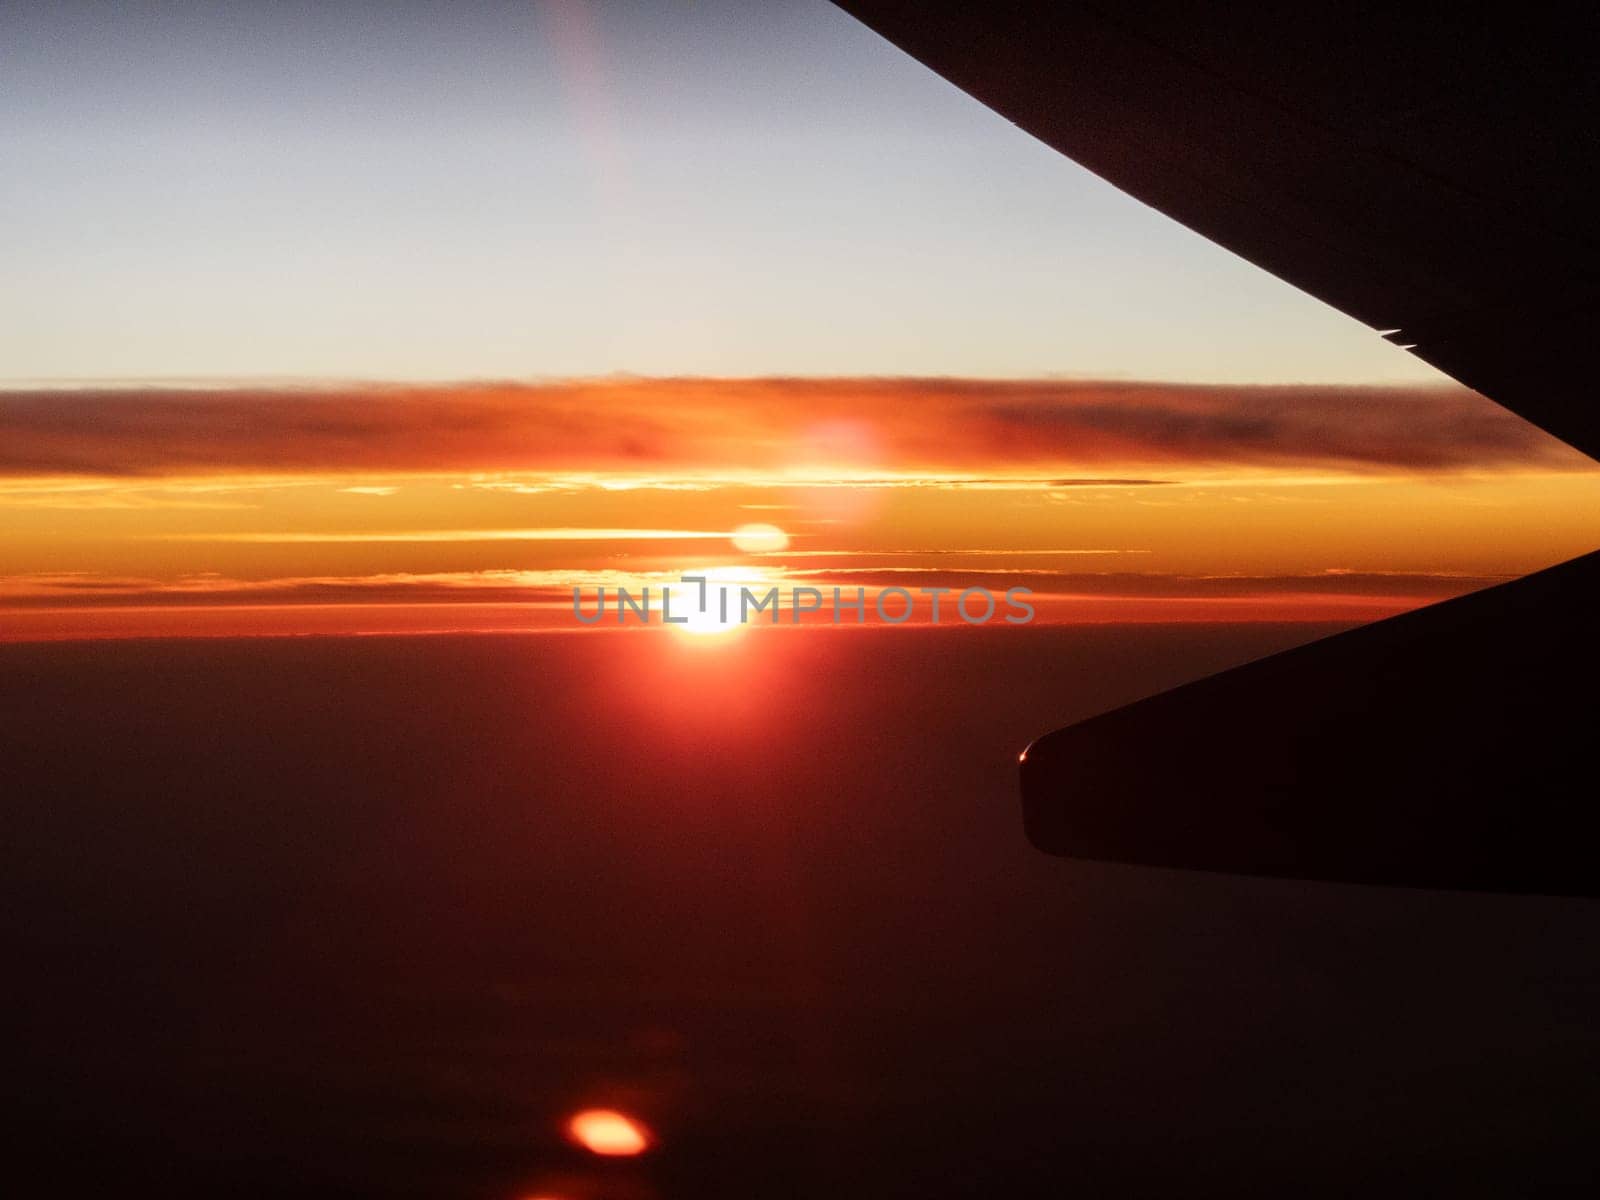 Stunning sunset seen from above clouds on a plane.